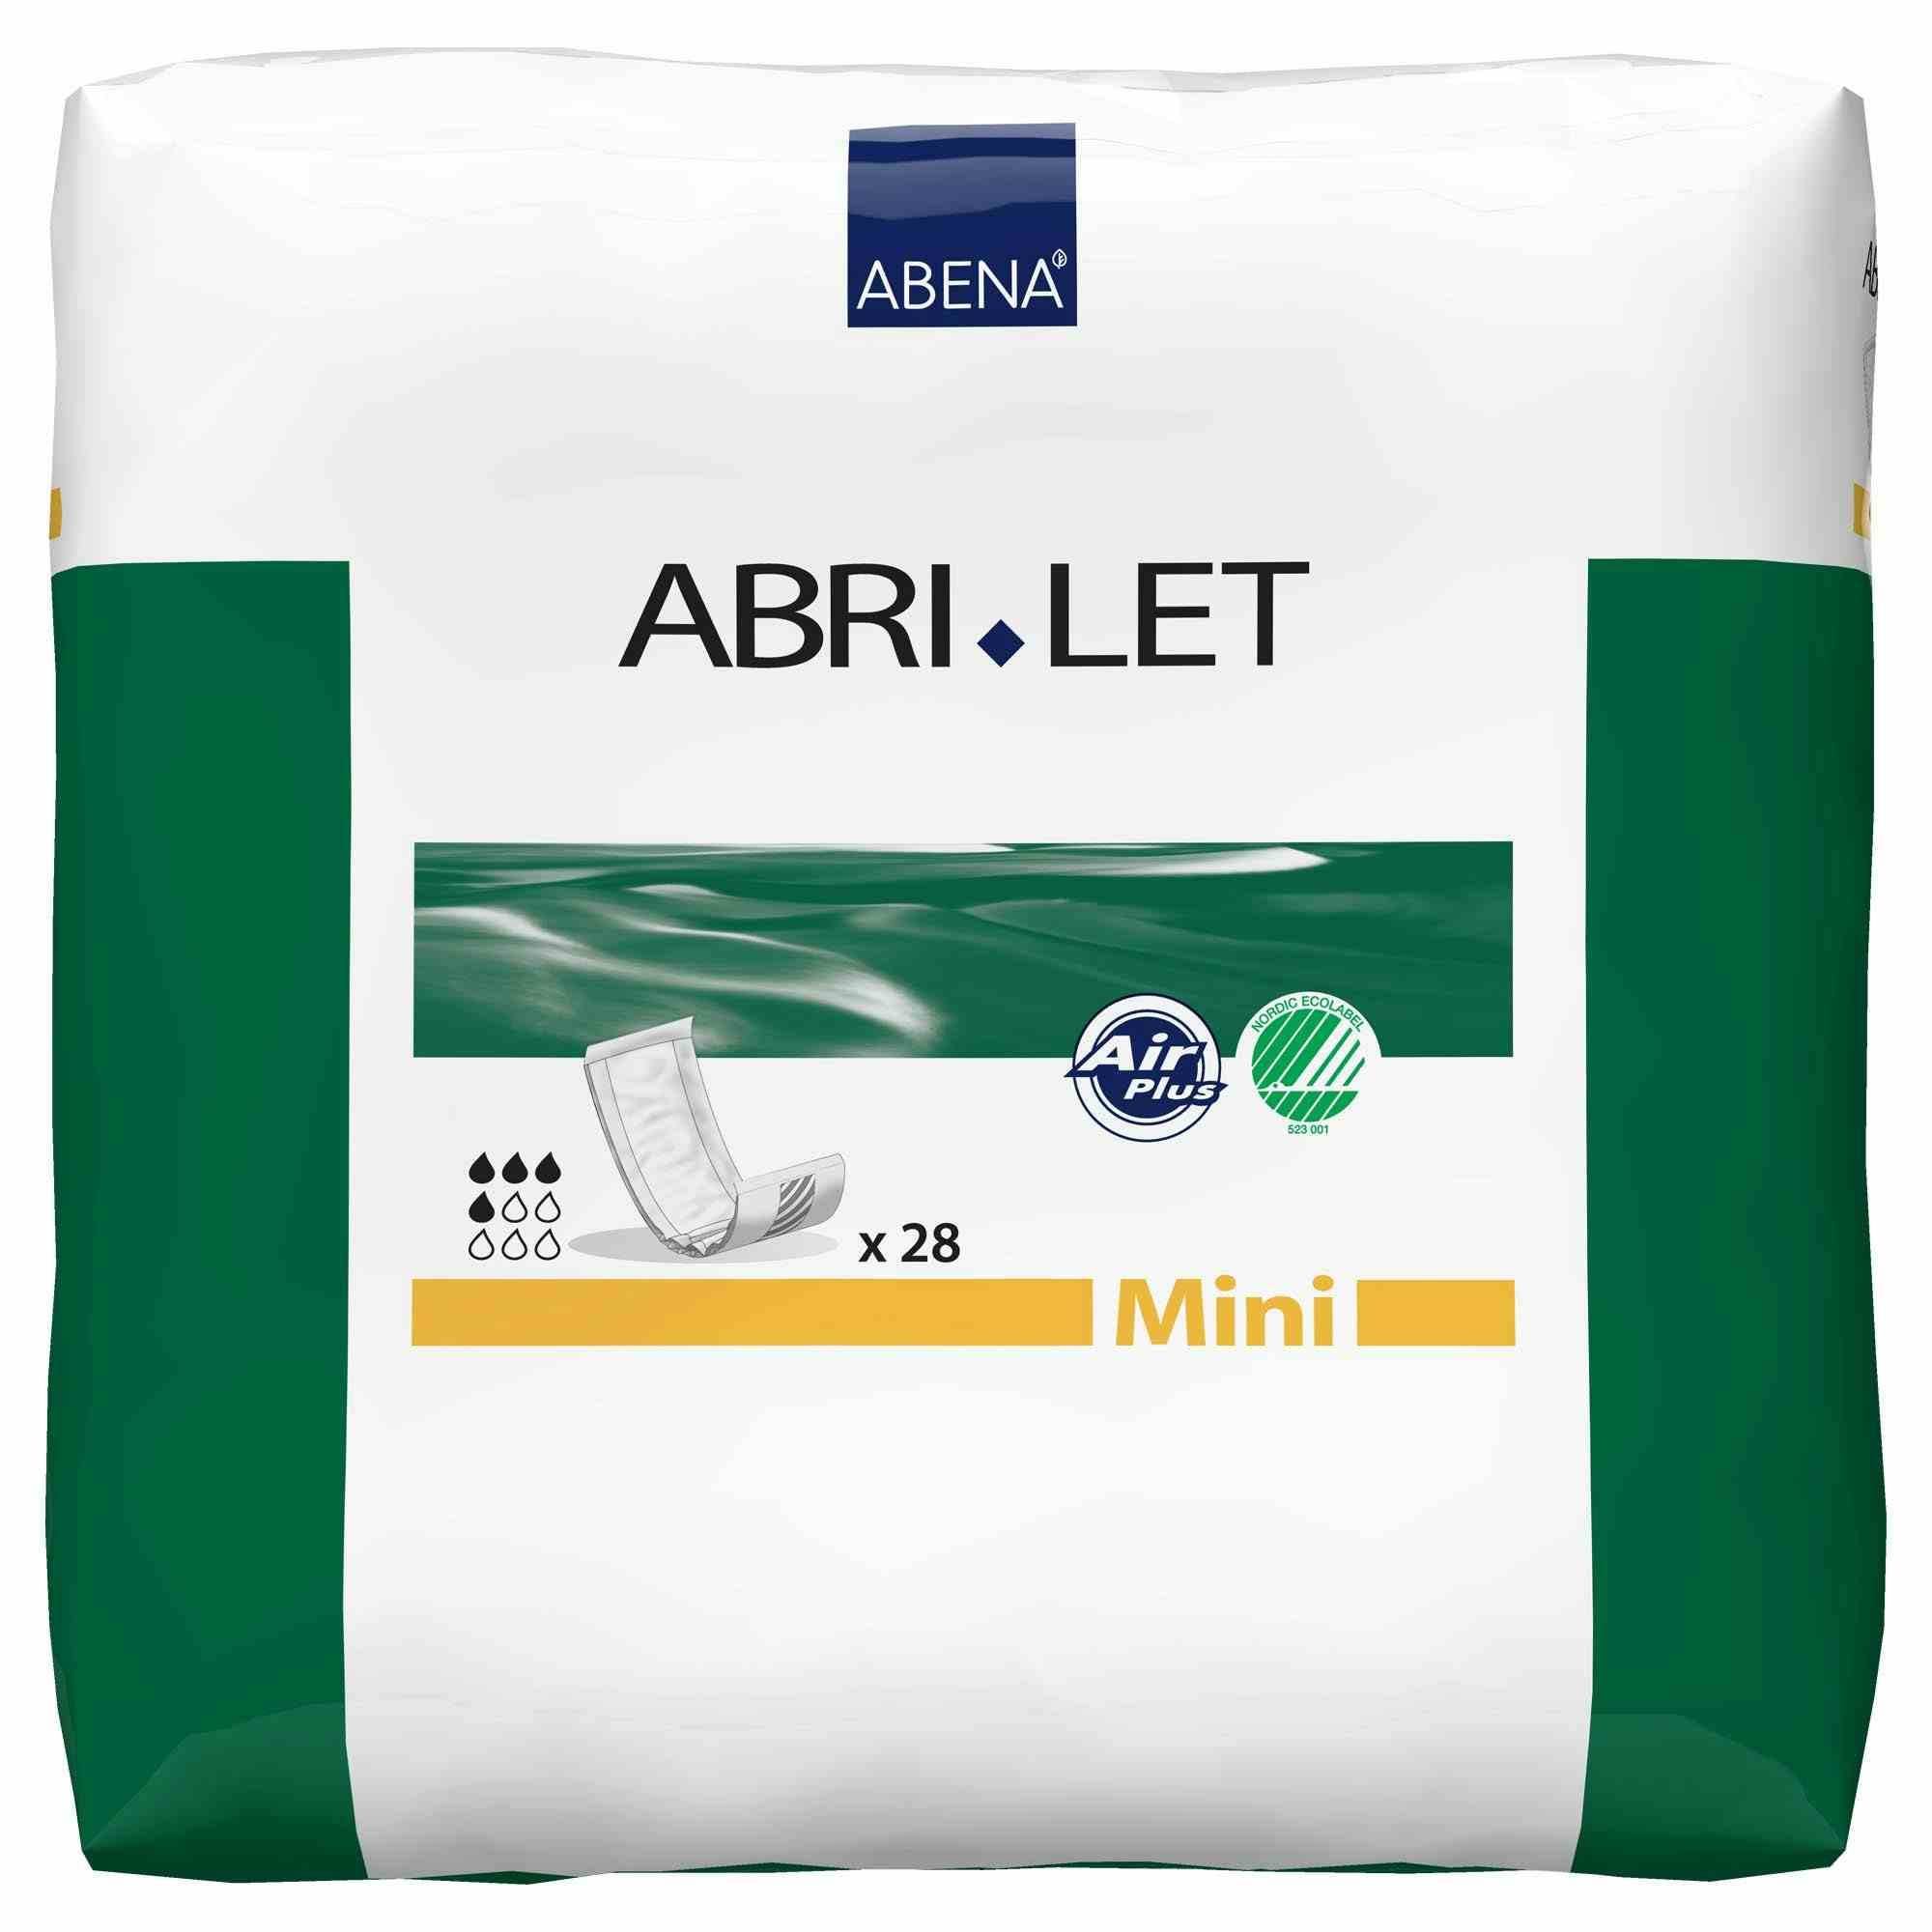 Abri-Let Mini Adult Unisex Disposable Bladder Control Pad, Light Absorbency , 300217, Case of 252 (9 Bags)